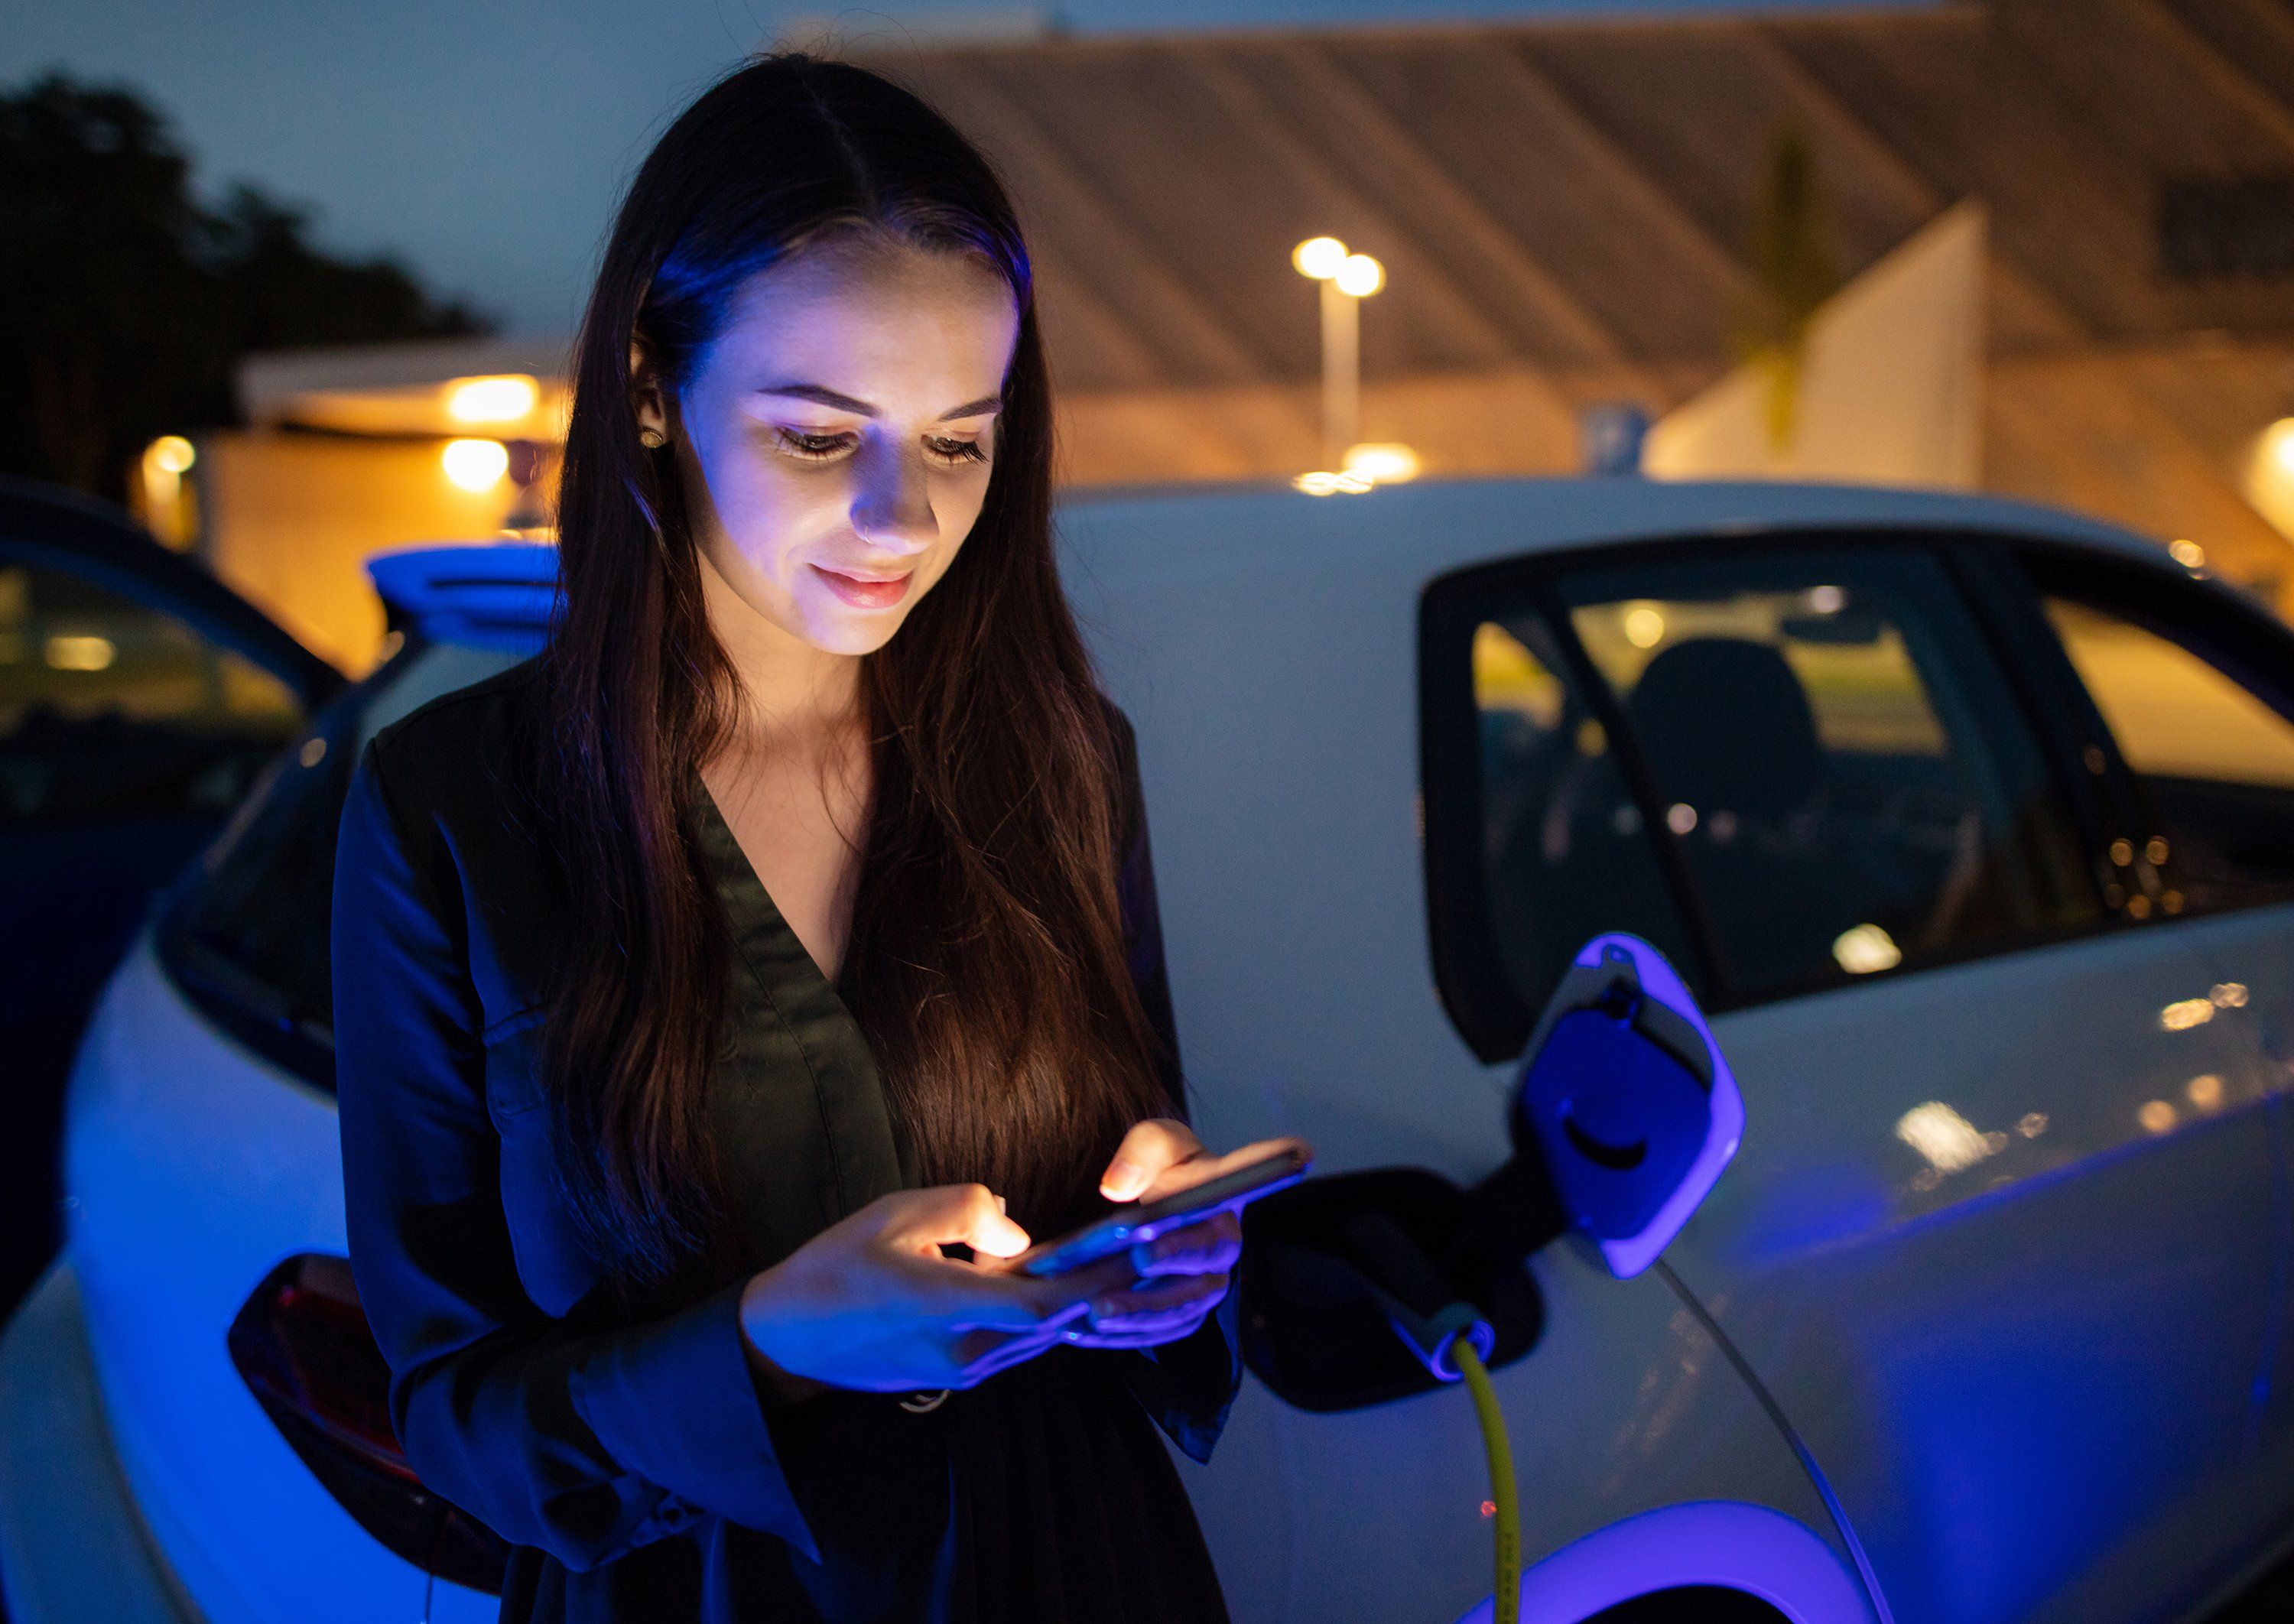 Nighttime photo of a woman looking at her phone as her electric vehicle charges.